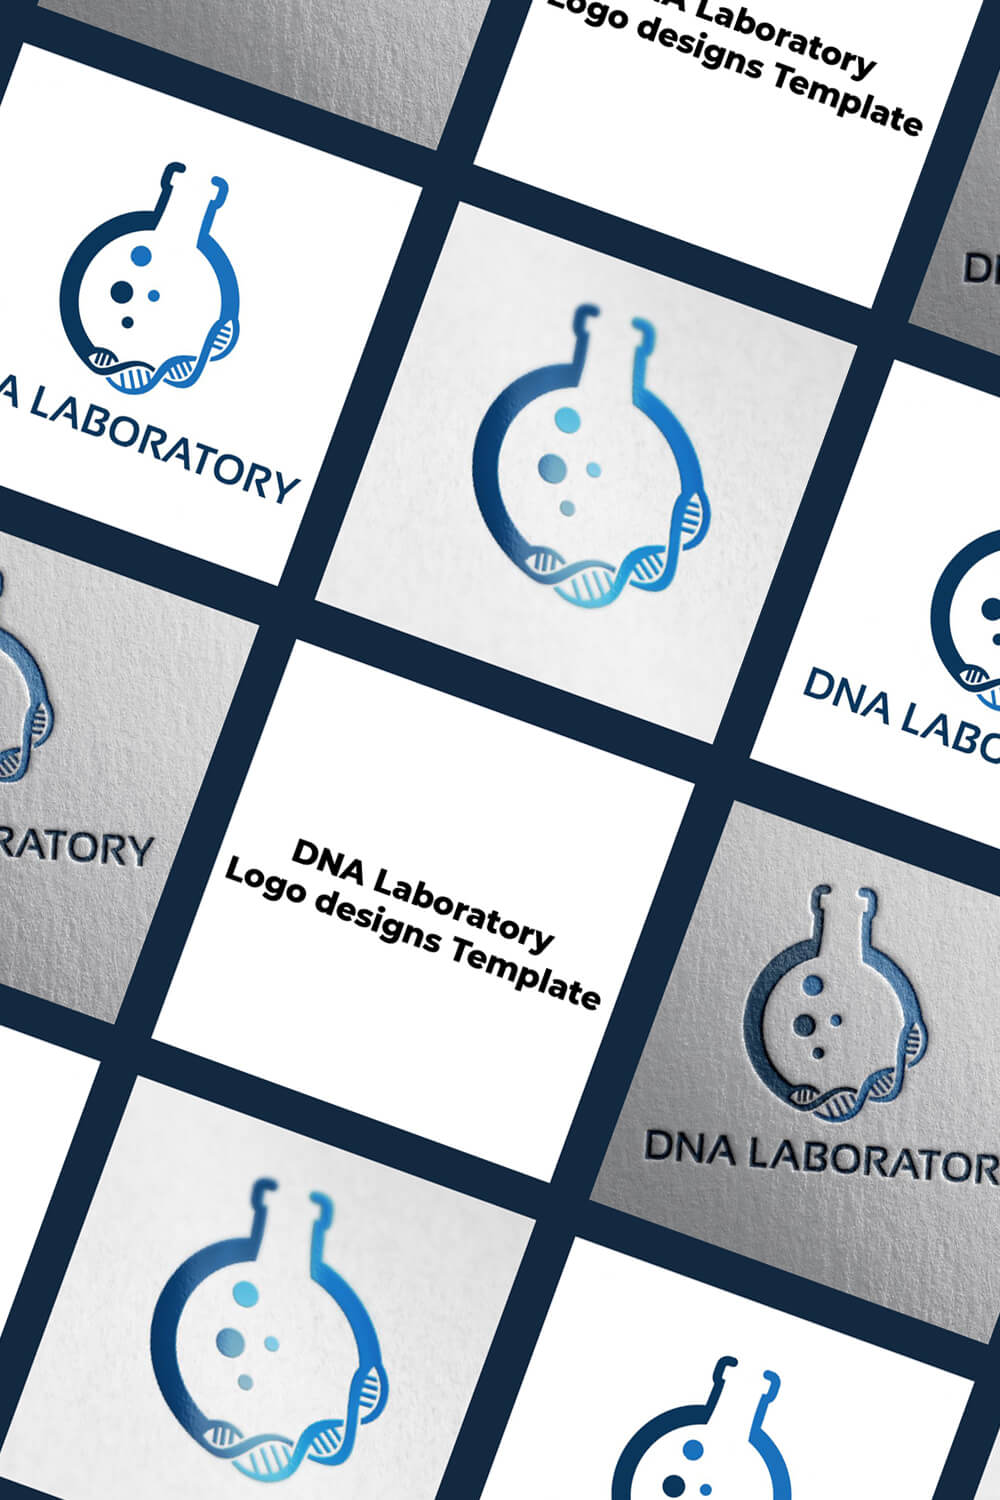 Lots of small blue DNA lab logos on gray and white backgrounds.